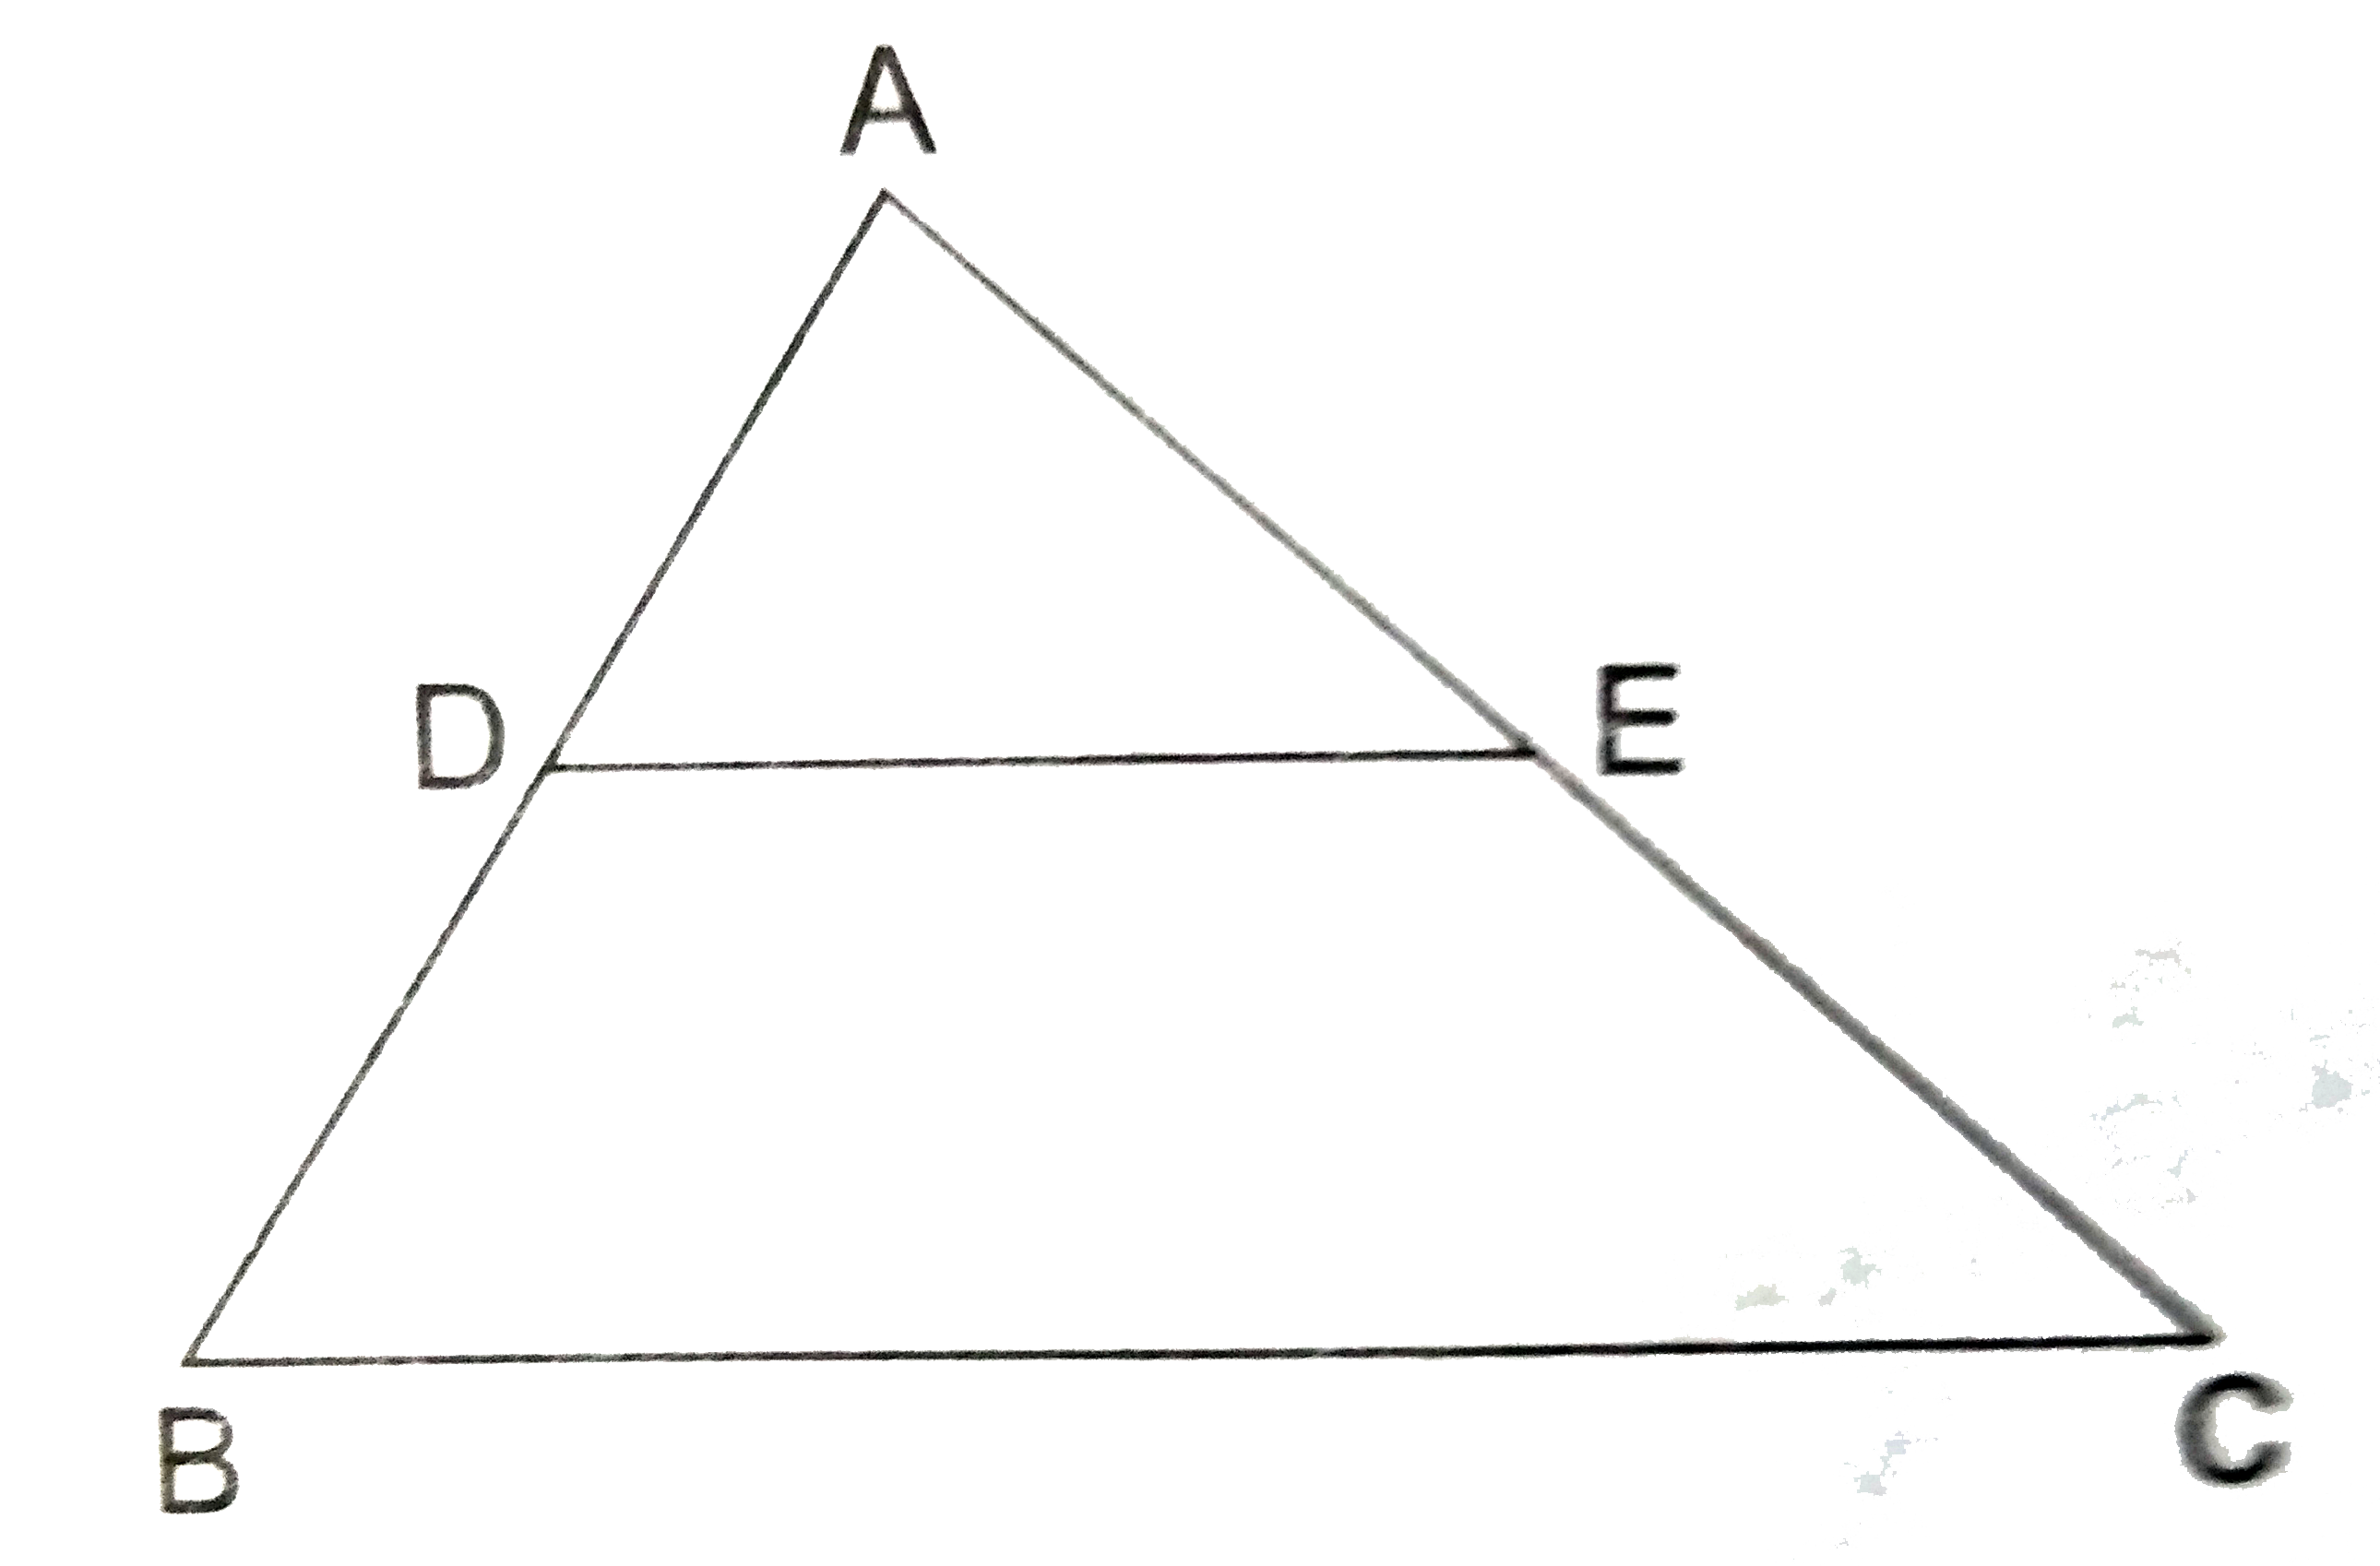 In Delta ABC, D  and E are the midpoint of AB and AC respectively. Find the ratio of the areas of Delta ADE and Delta ABC.